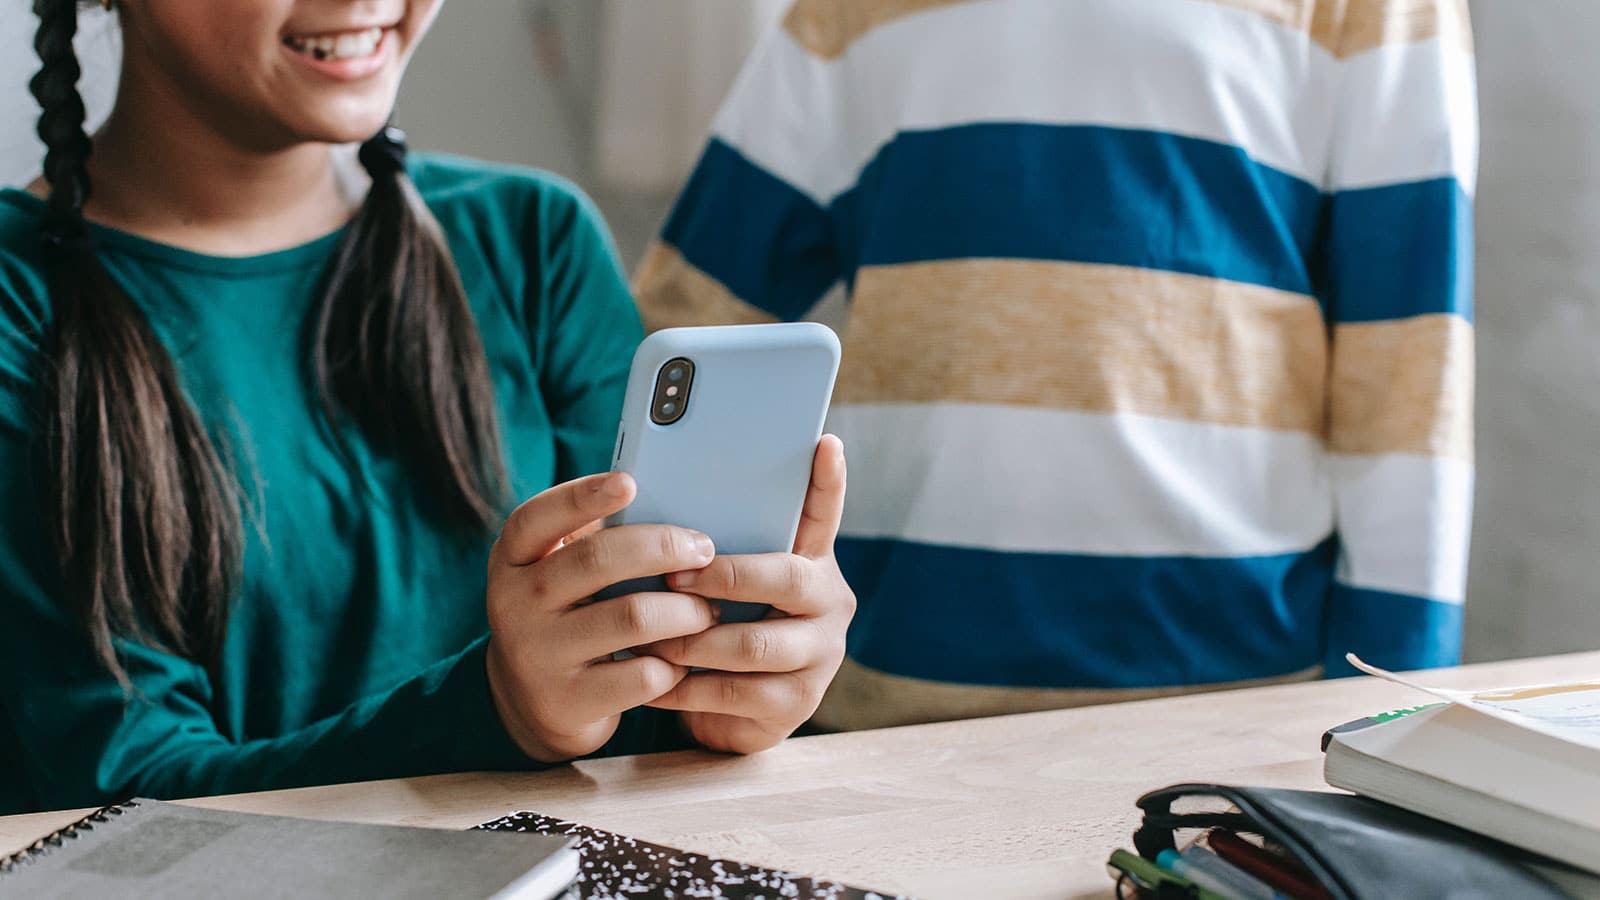 Ways to Use Social Media for Good: How Educators and Parents Can Take a Proactive Approach with TikTok, Instagram, etc